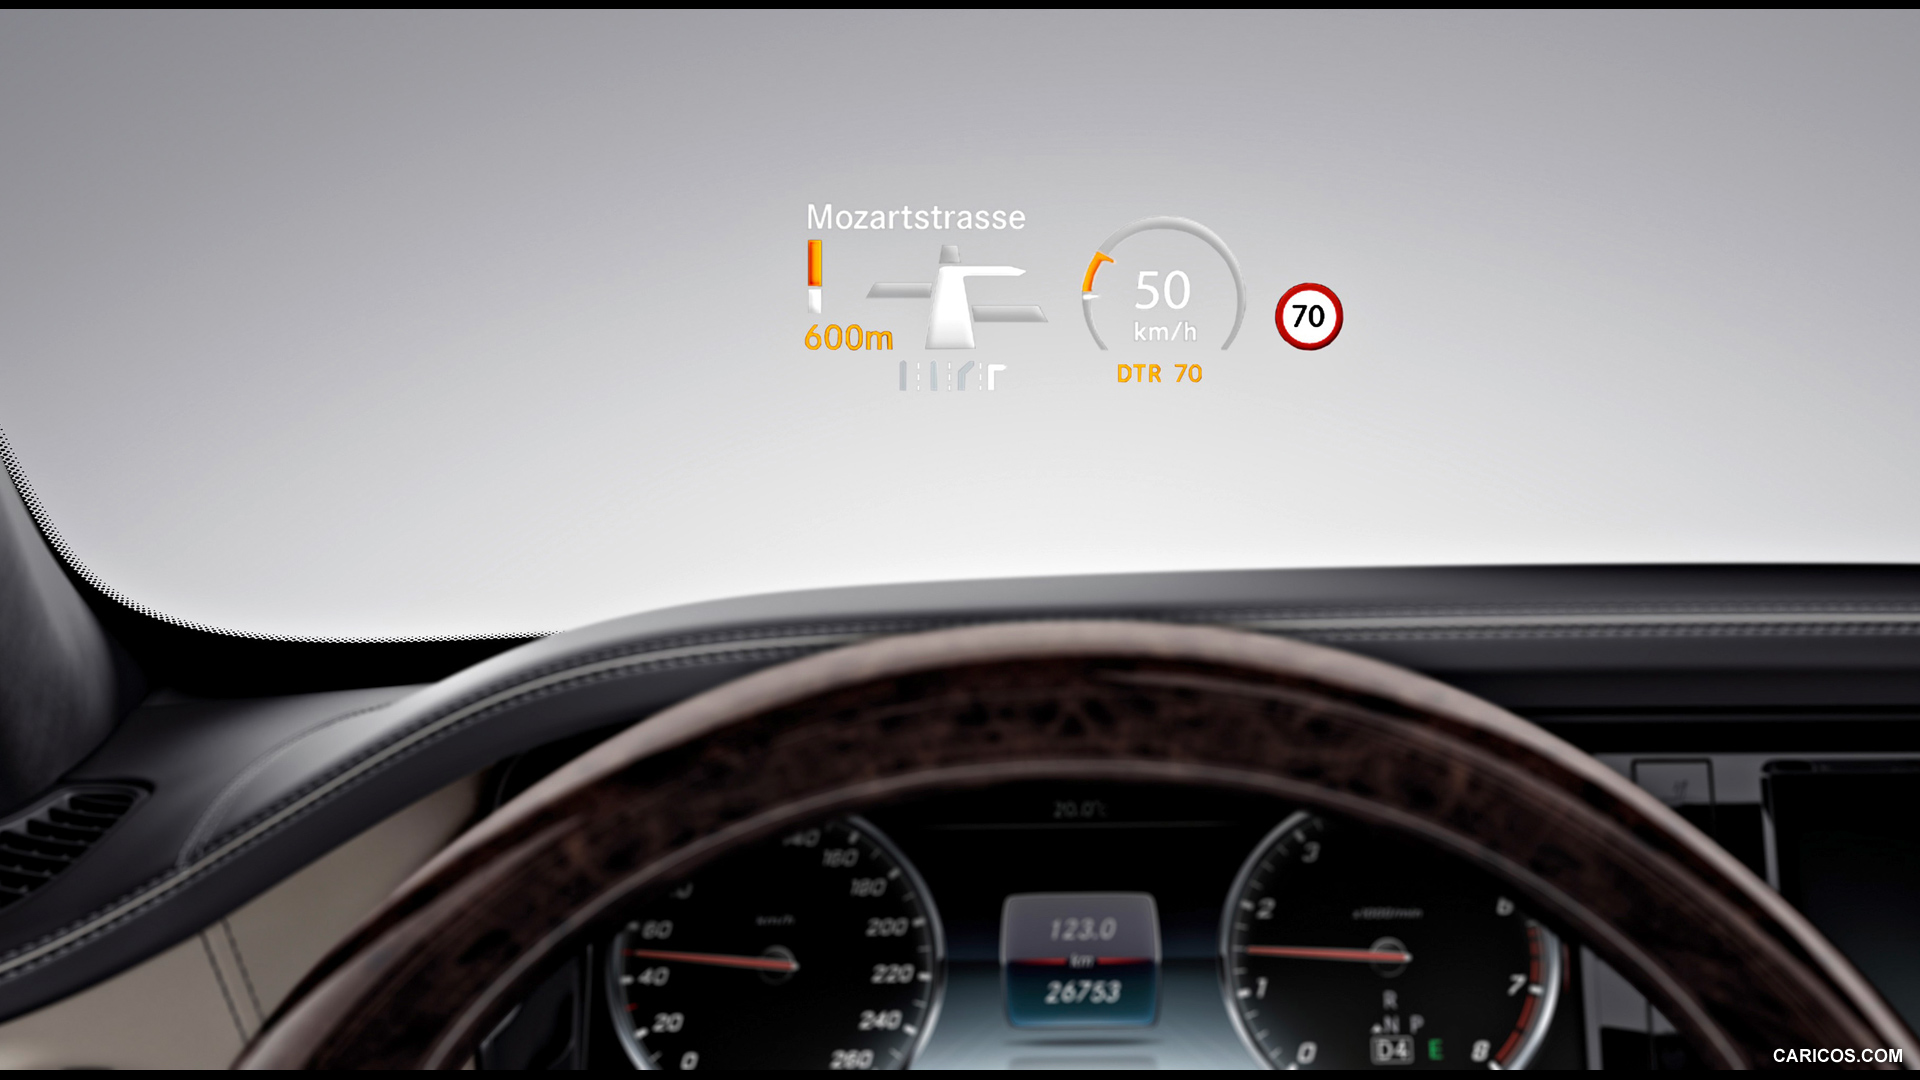 2015 Mercedes-Benz S600 Heads-Up Display - Interior Detail, #9 of 10